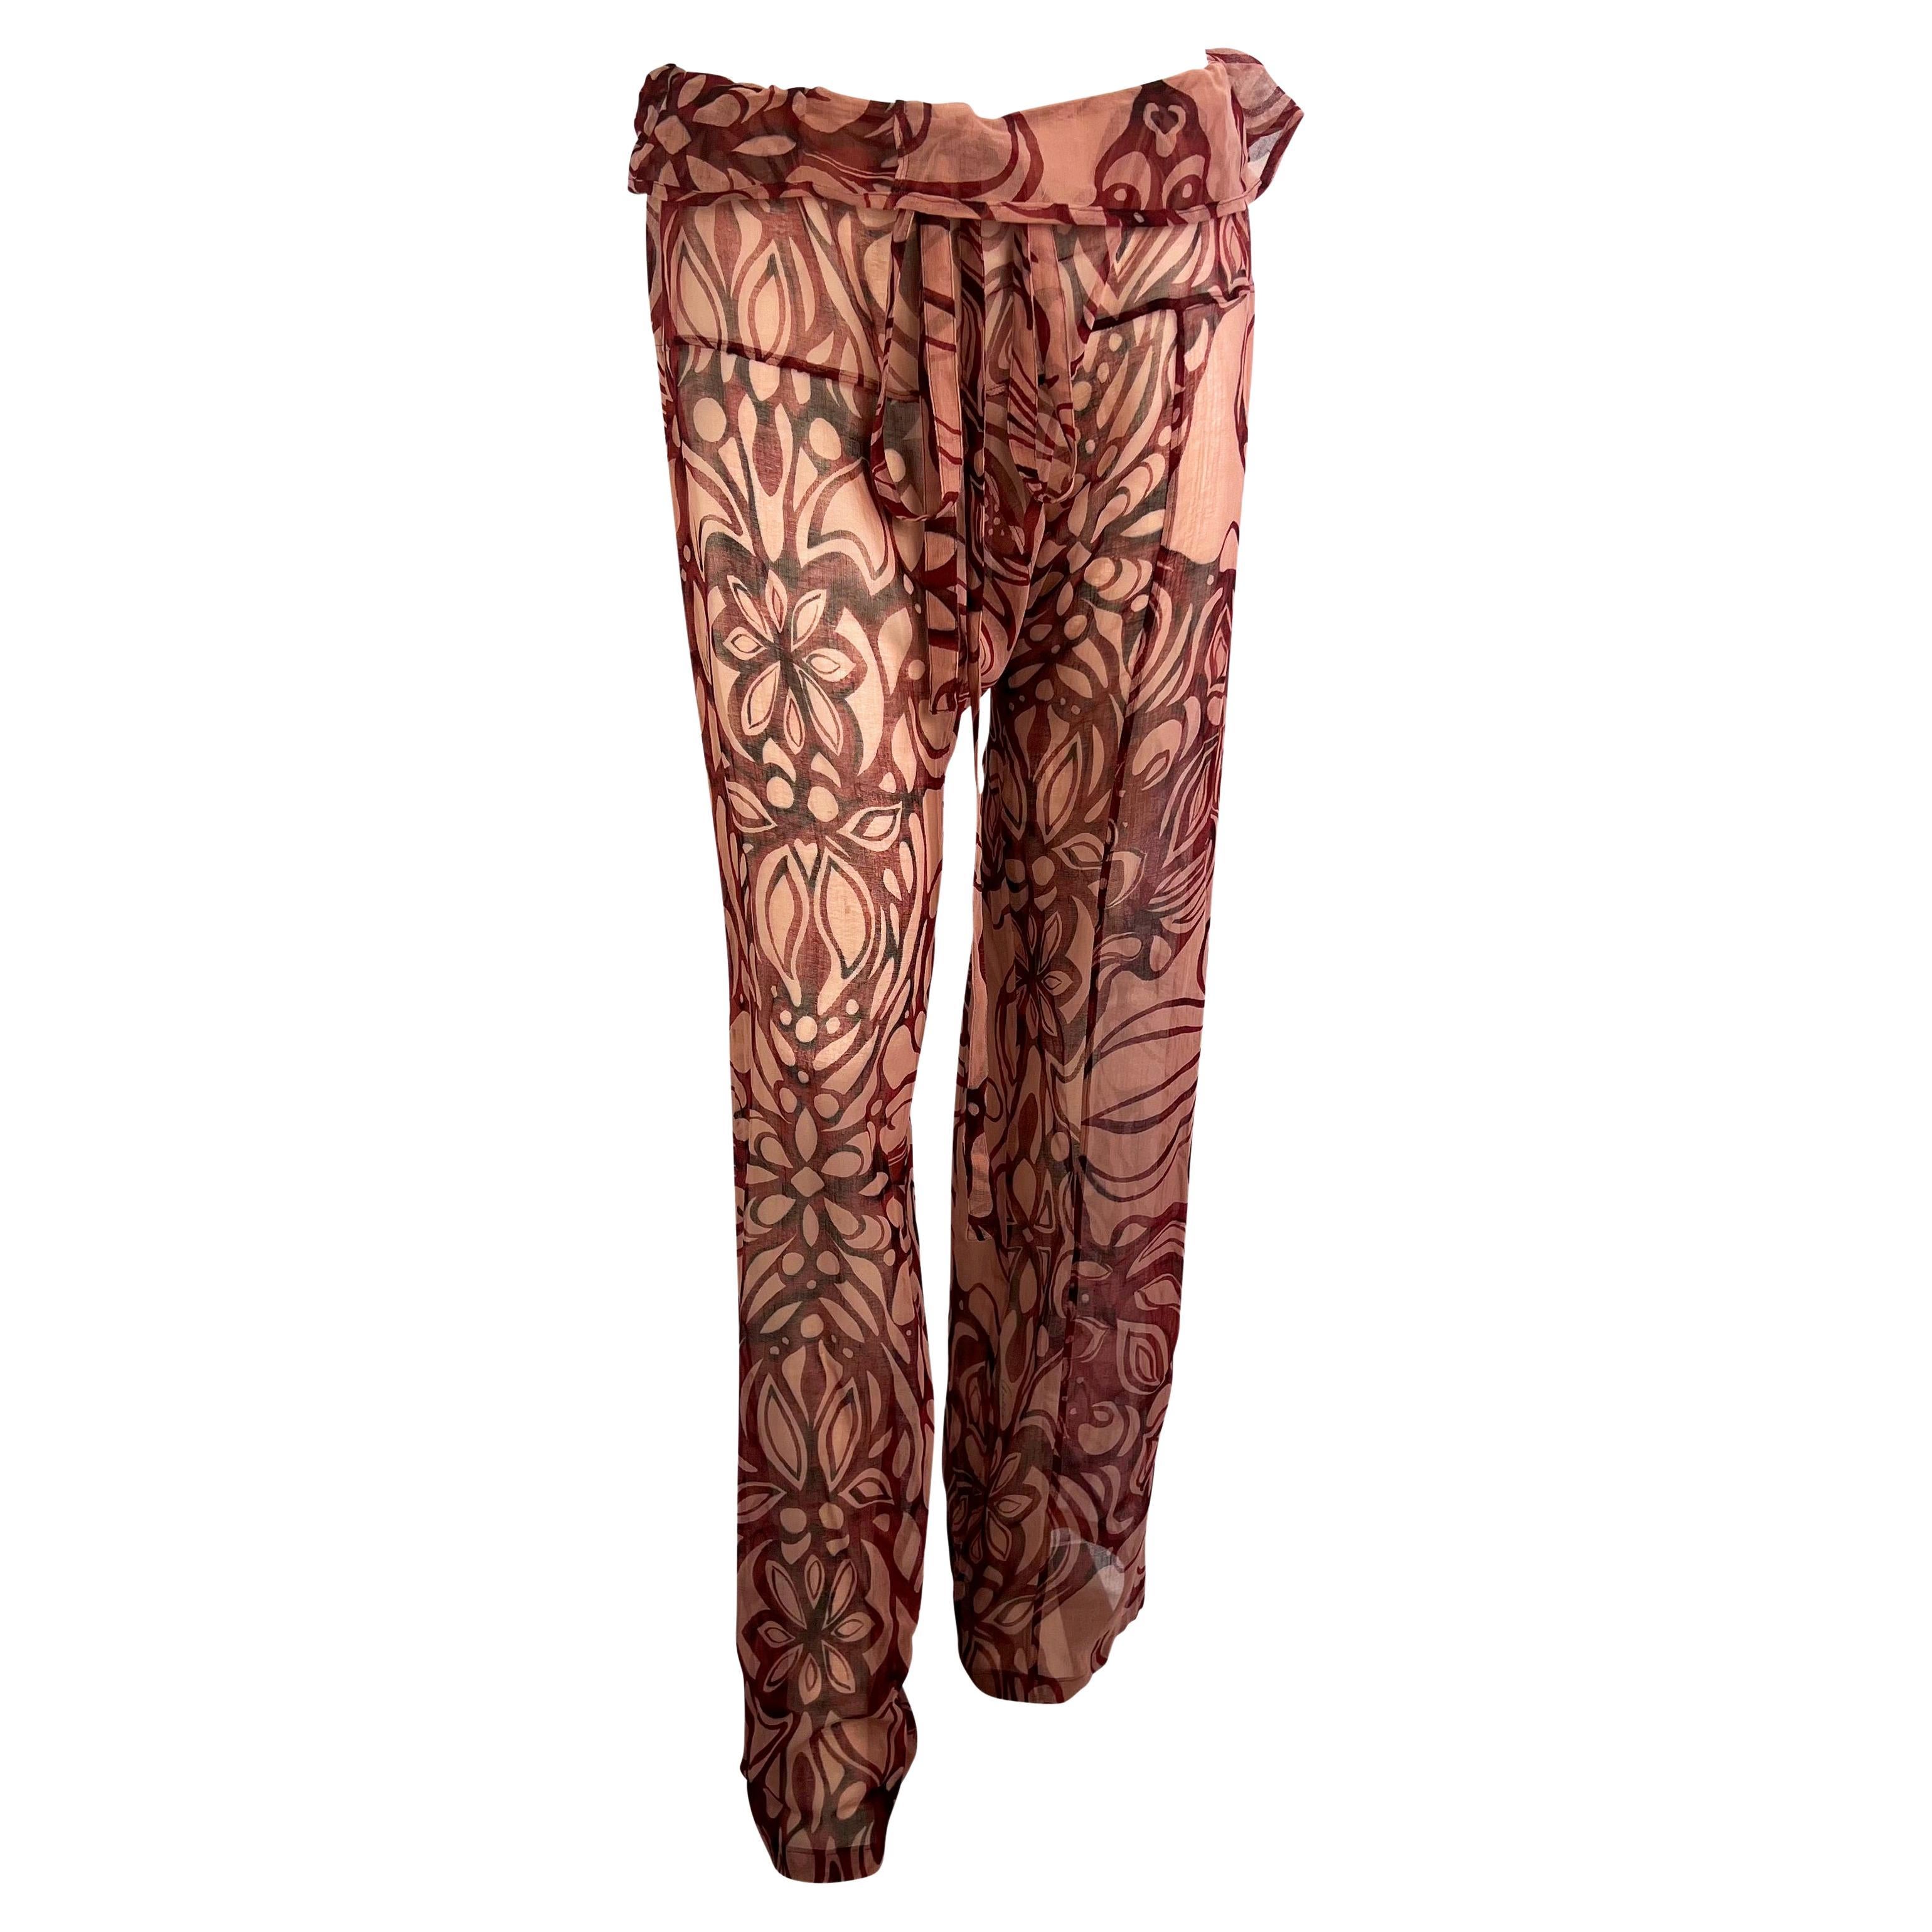 S/S 2002 Gucci von Tom Ford schiere Floral Tattoo Strand Coverup Pant Set NWT im Angebot 2